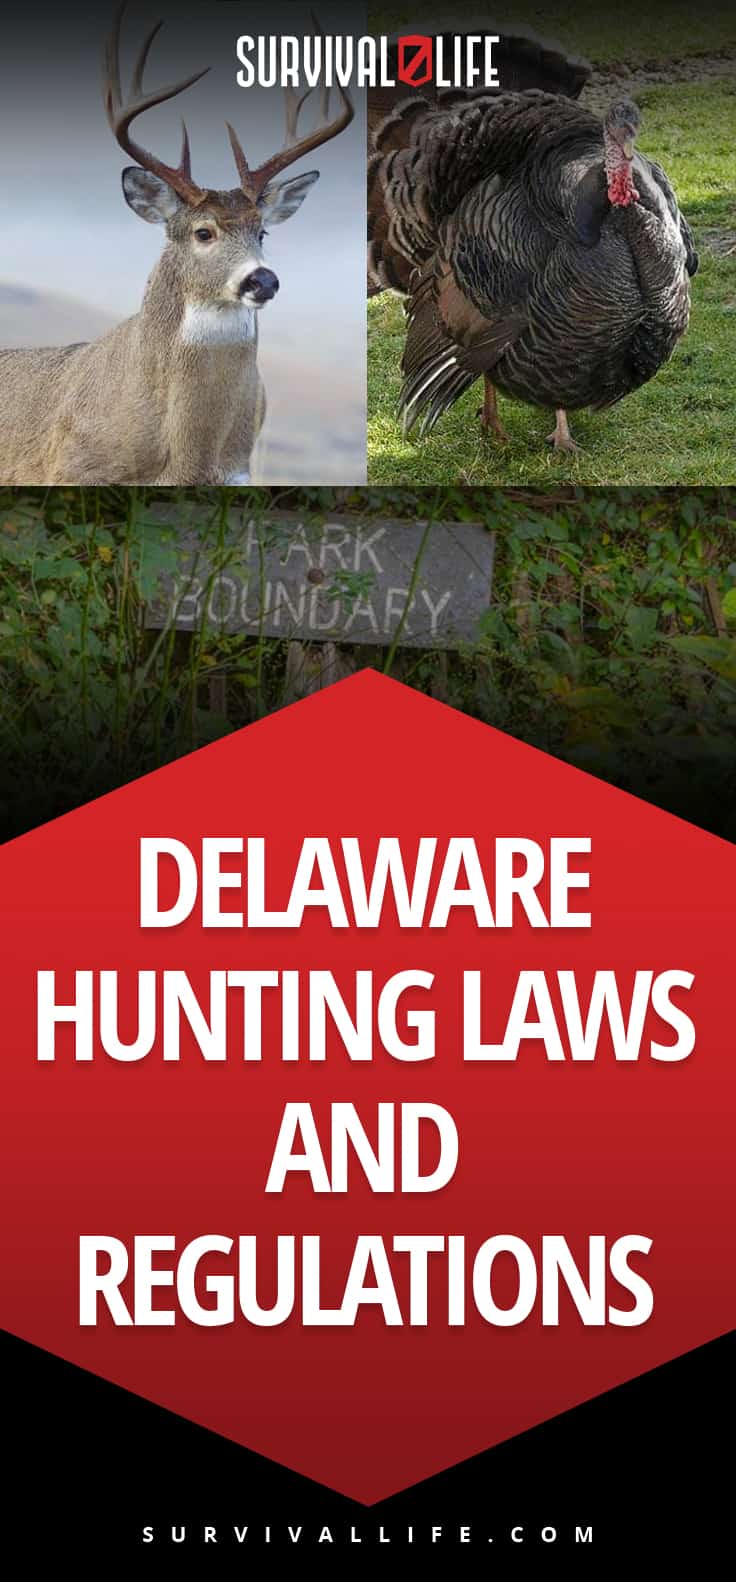 Delaware Hunting Laws and Regulations